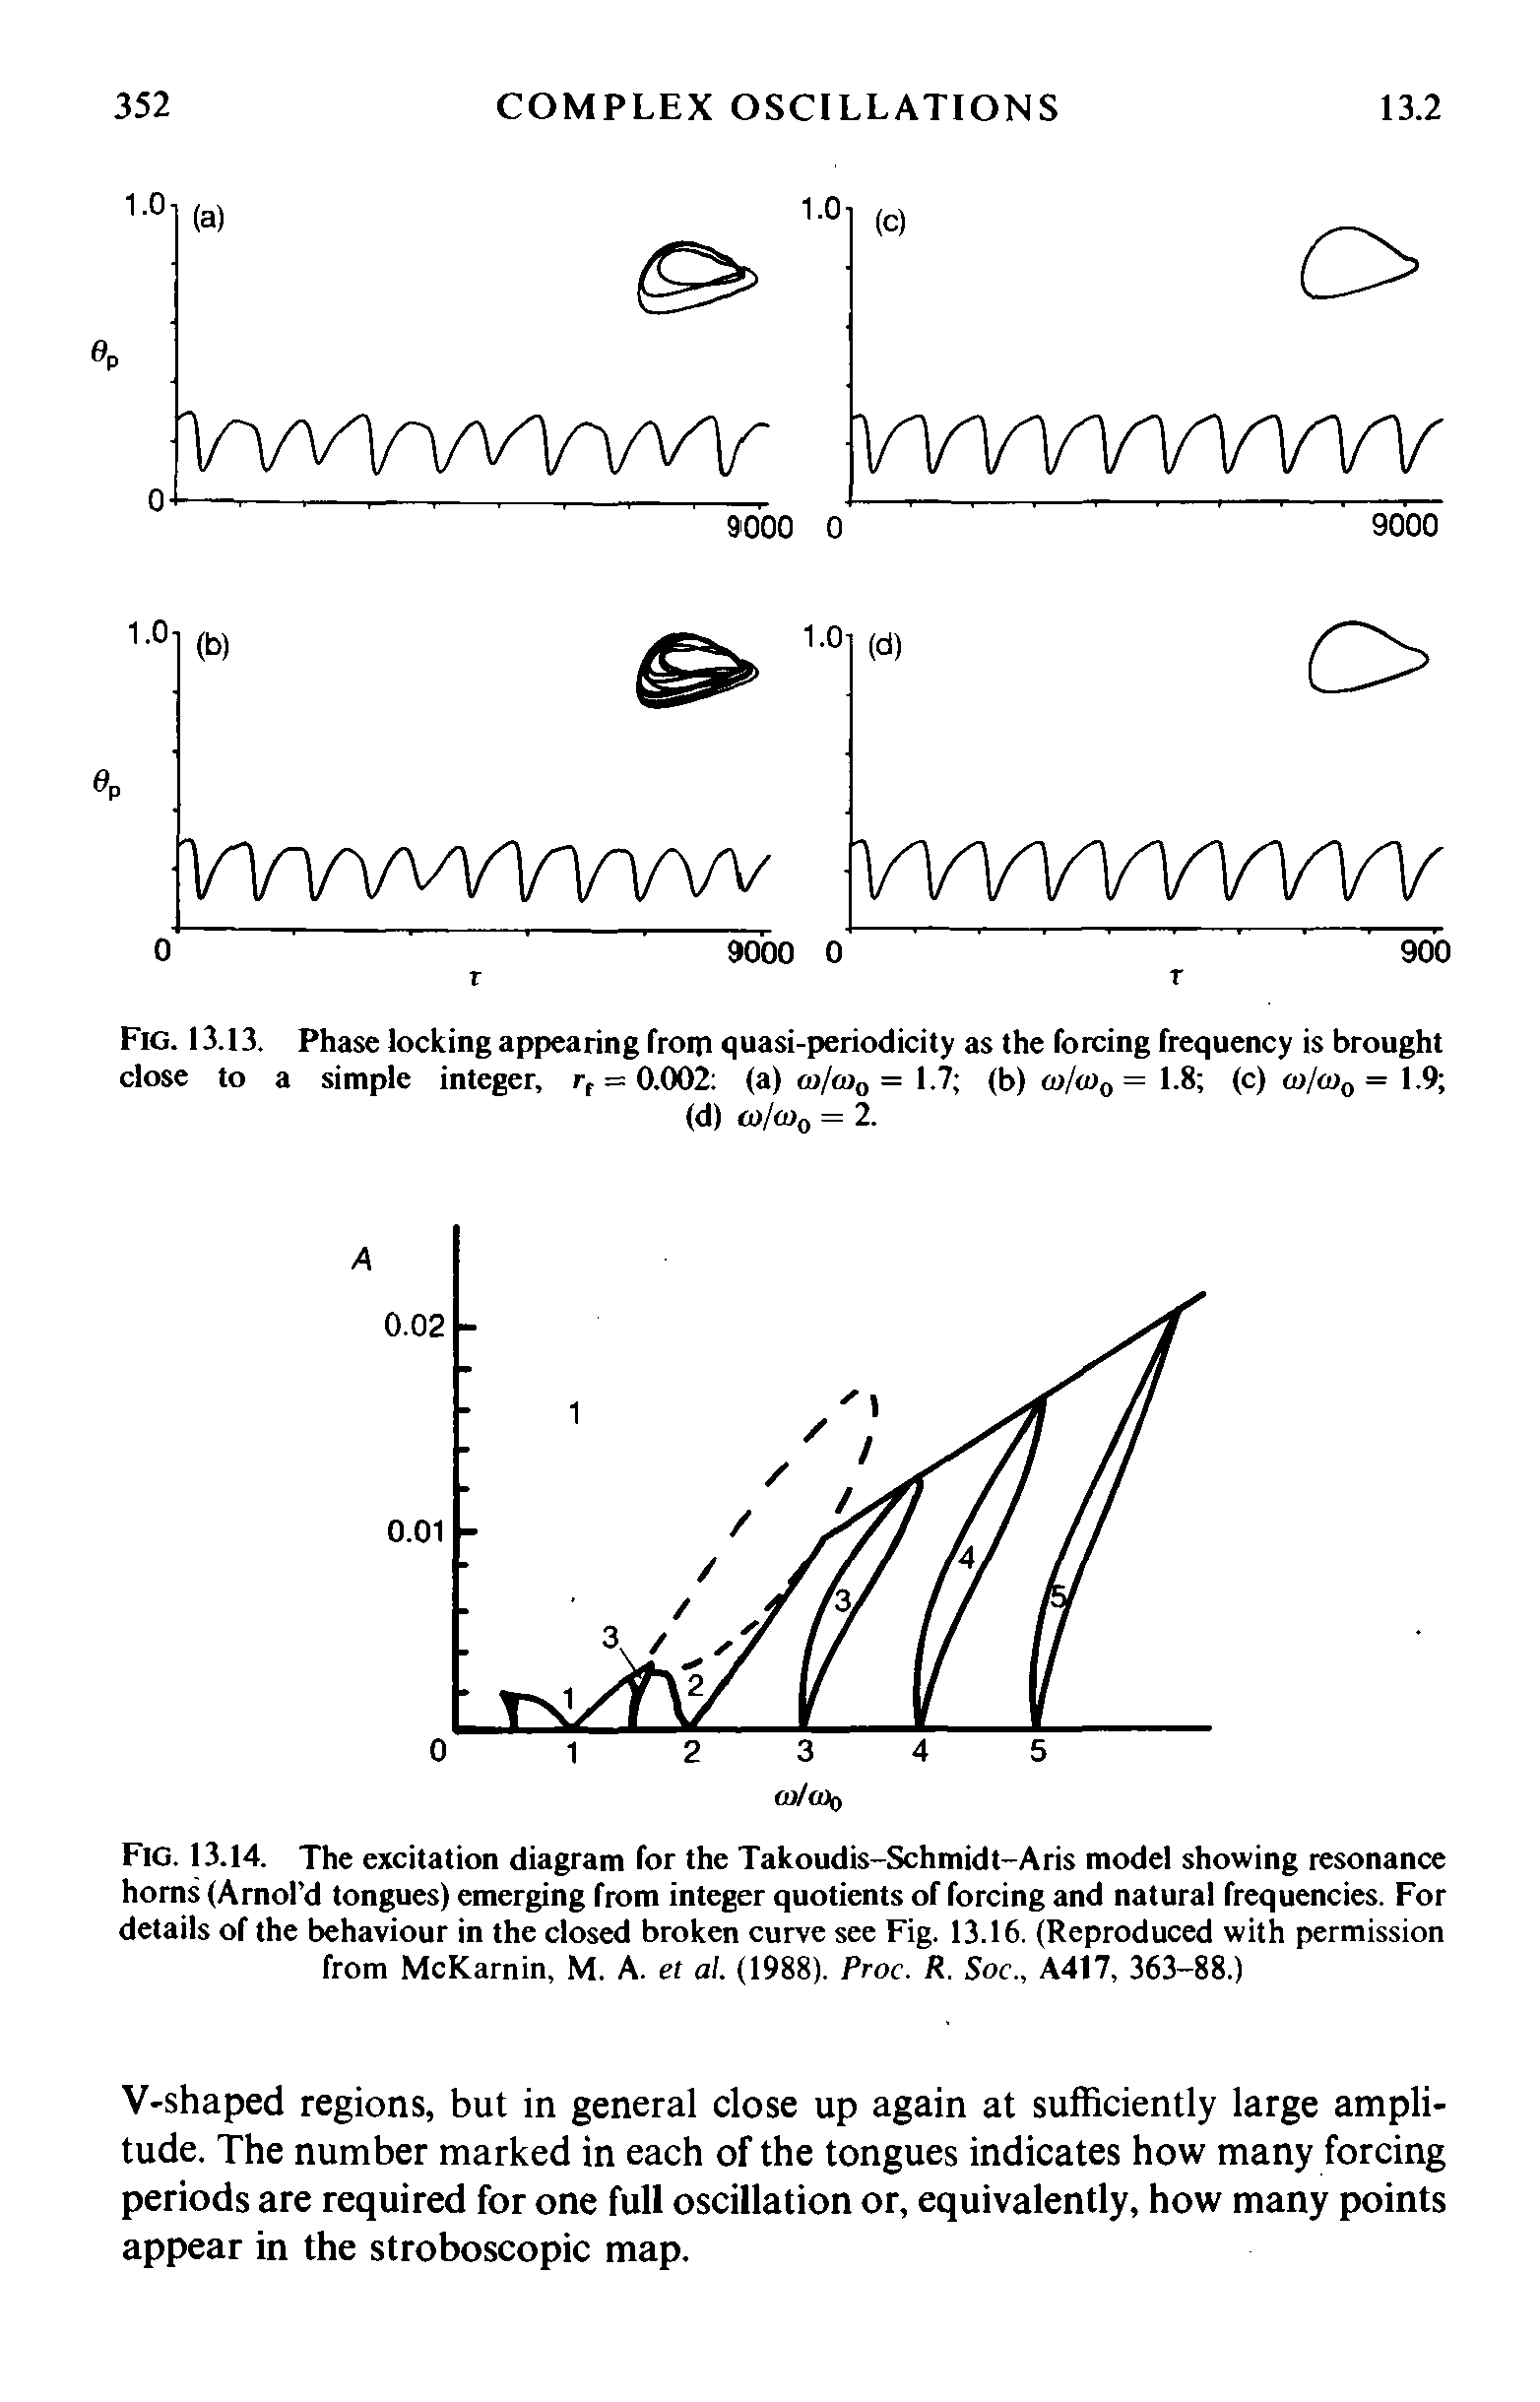 Fig. 13.14. The excitation diagram for the Takoudis-Schmidt-Aris model showing resonance horns (Arnol d tongues) emerging from integer quotients of forcing and natural frequencies. For details of the behaviour in the closed broken curve see Fig. 13.16. (Reproduced with permission from McKarnin, M. A. et al. (1988). Proc. R. Soc., A417, 363-88.)...